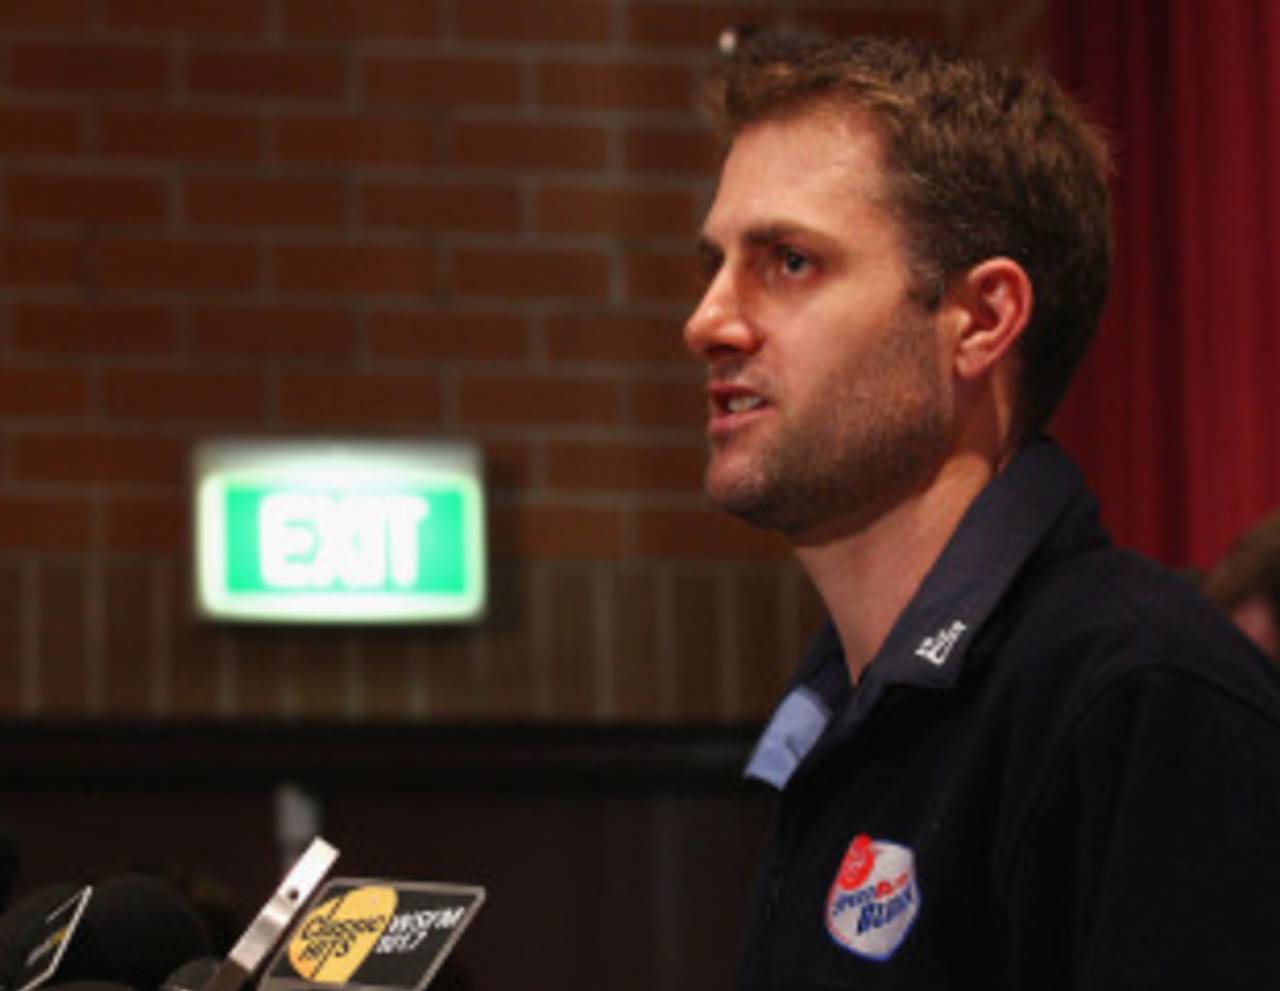 Simon Katich's says he will not play for Australia while Michael Clarke is captain&nbsp;&nbsp;&bull;&nbsp;&nbsp;Getty Images